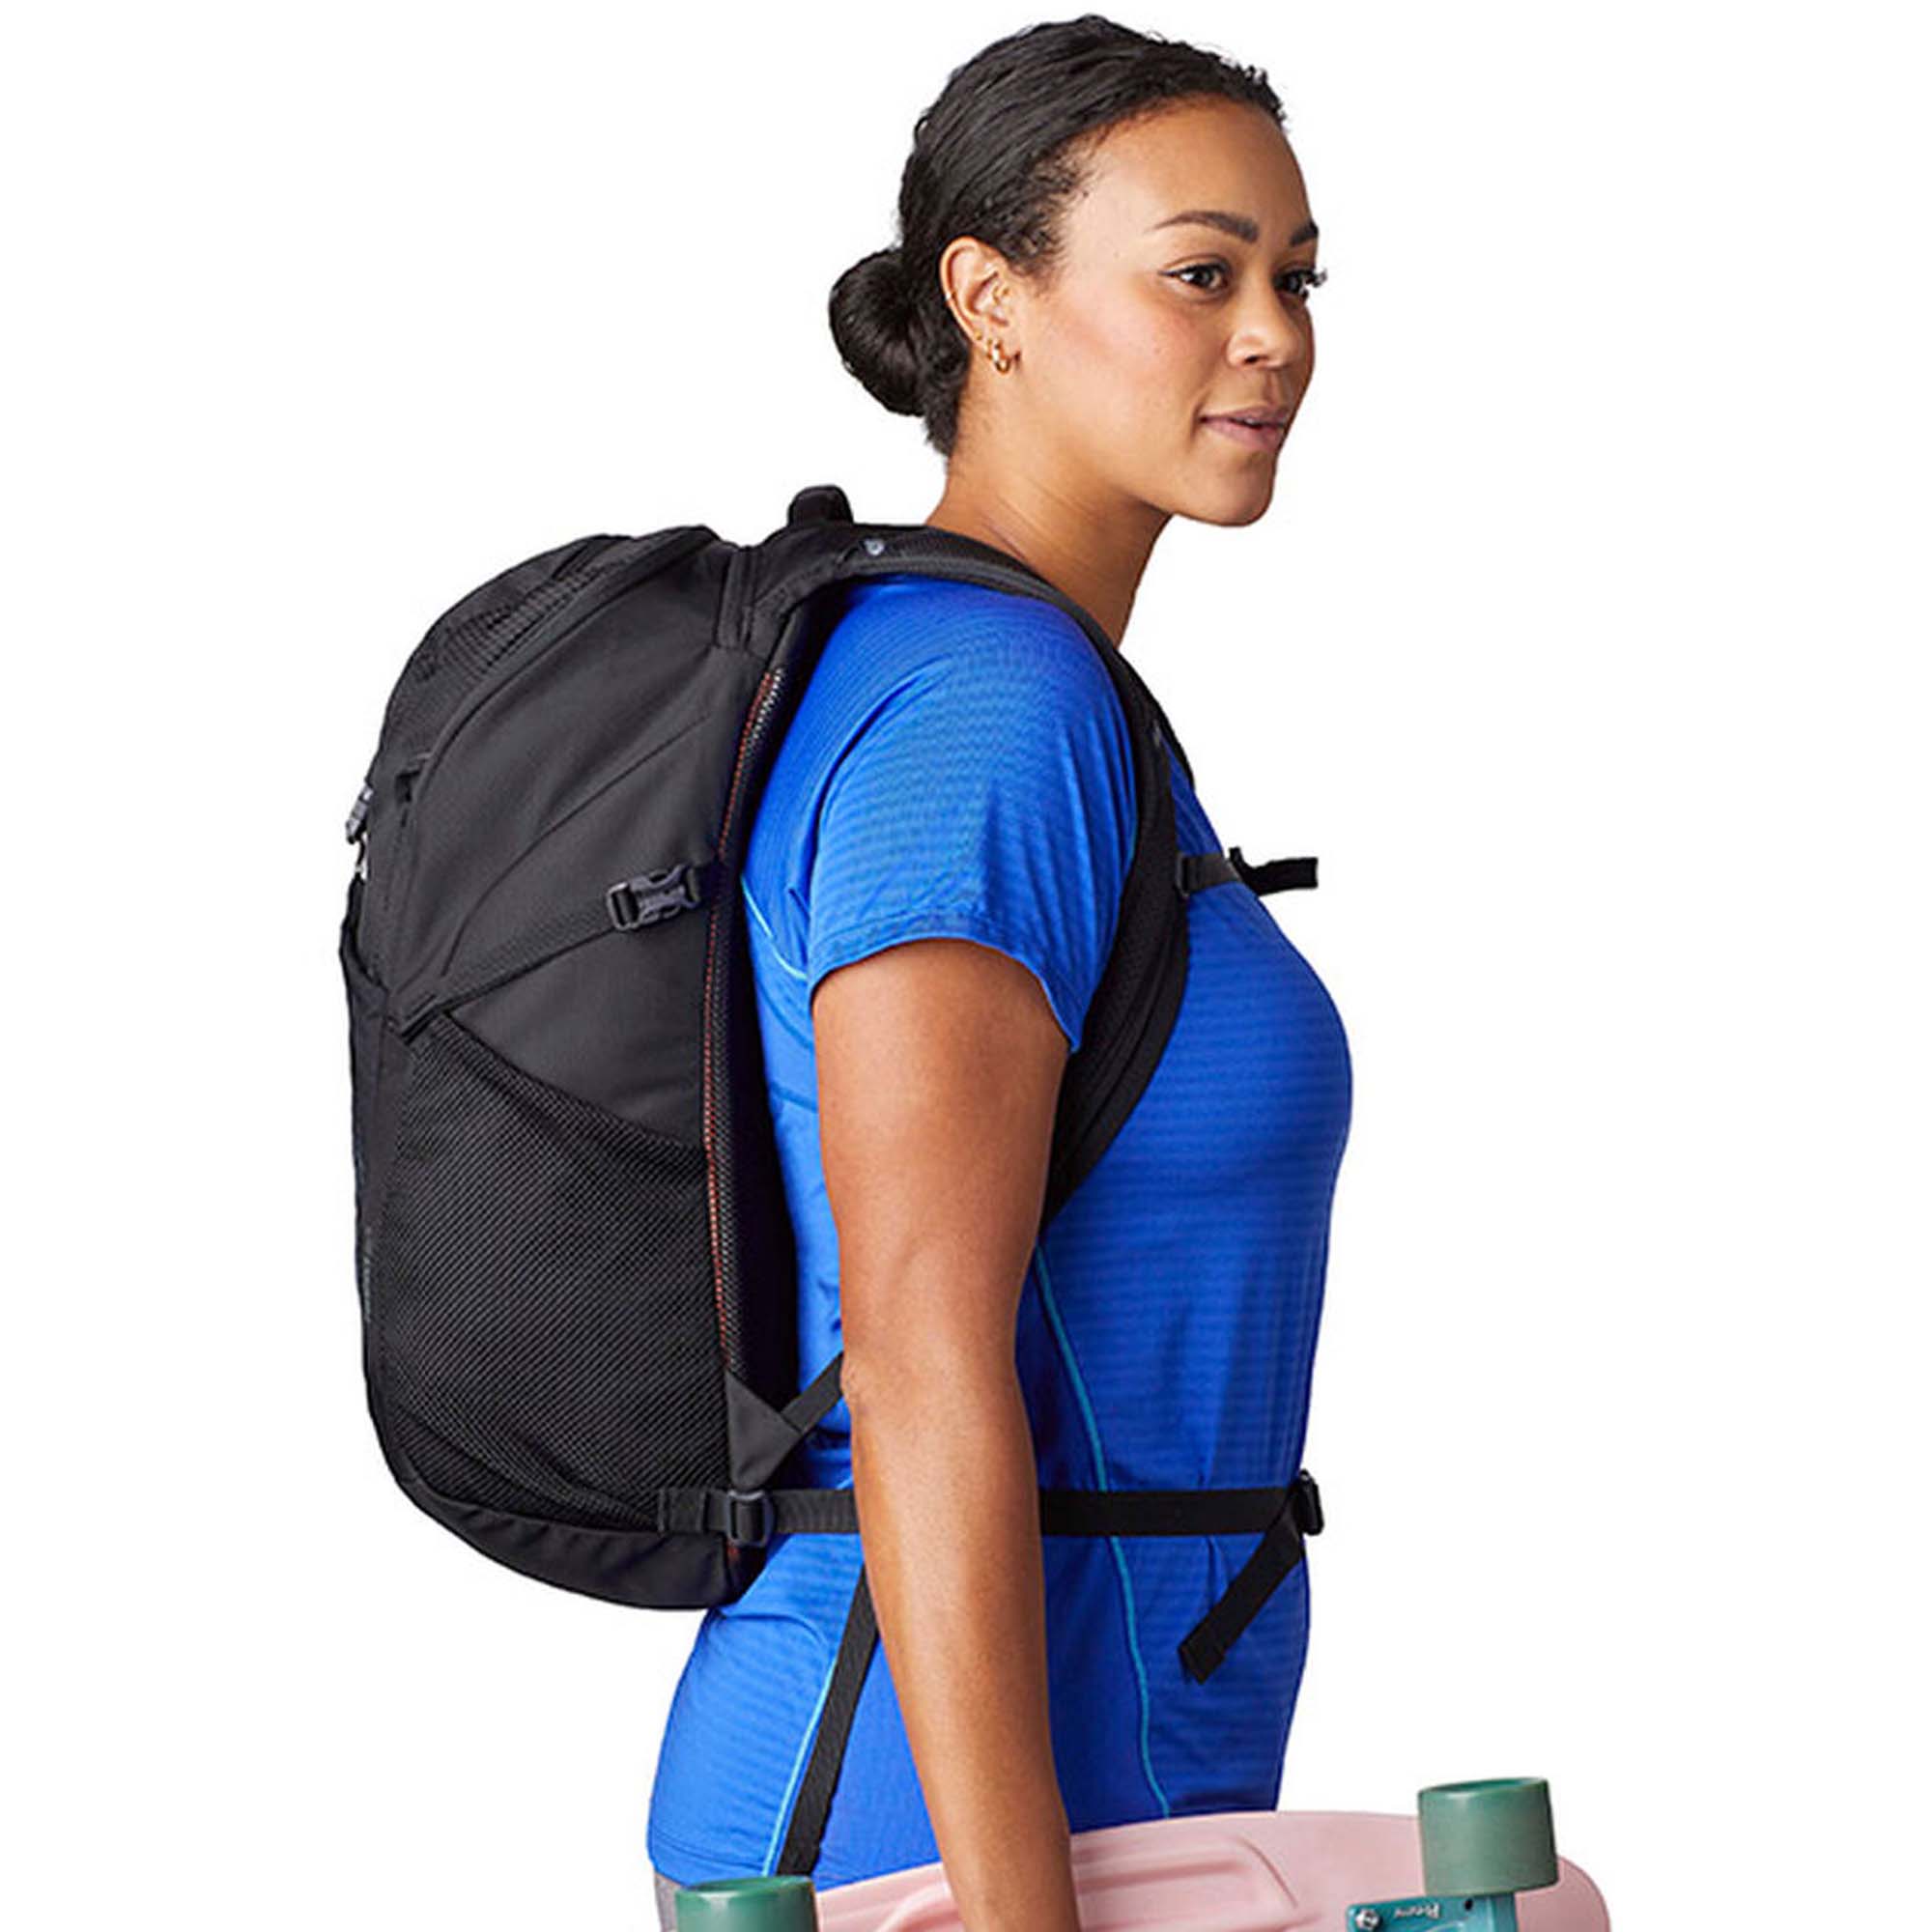 Gregory  Nano 24 Backpack/Day Pack